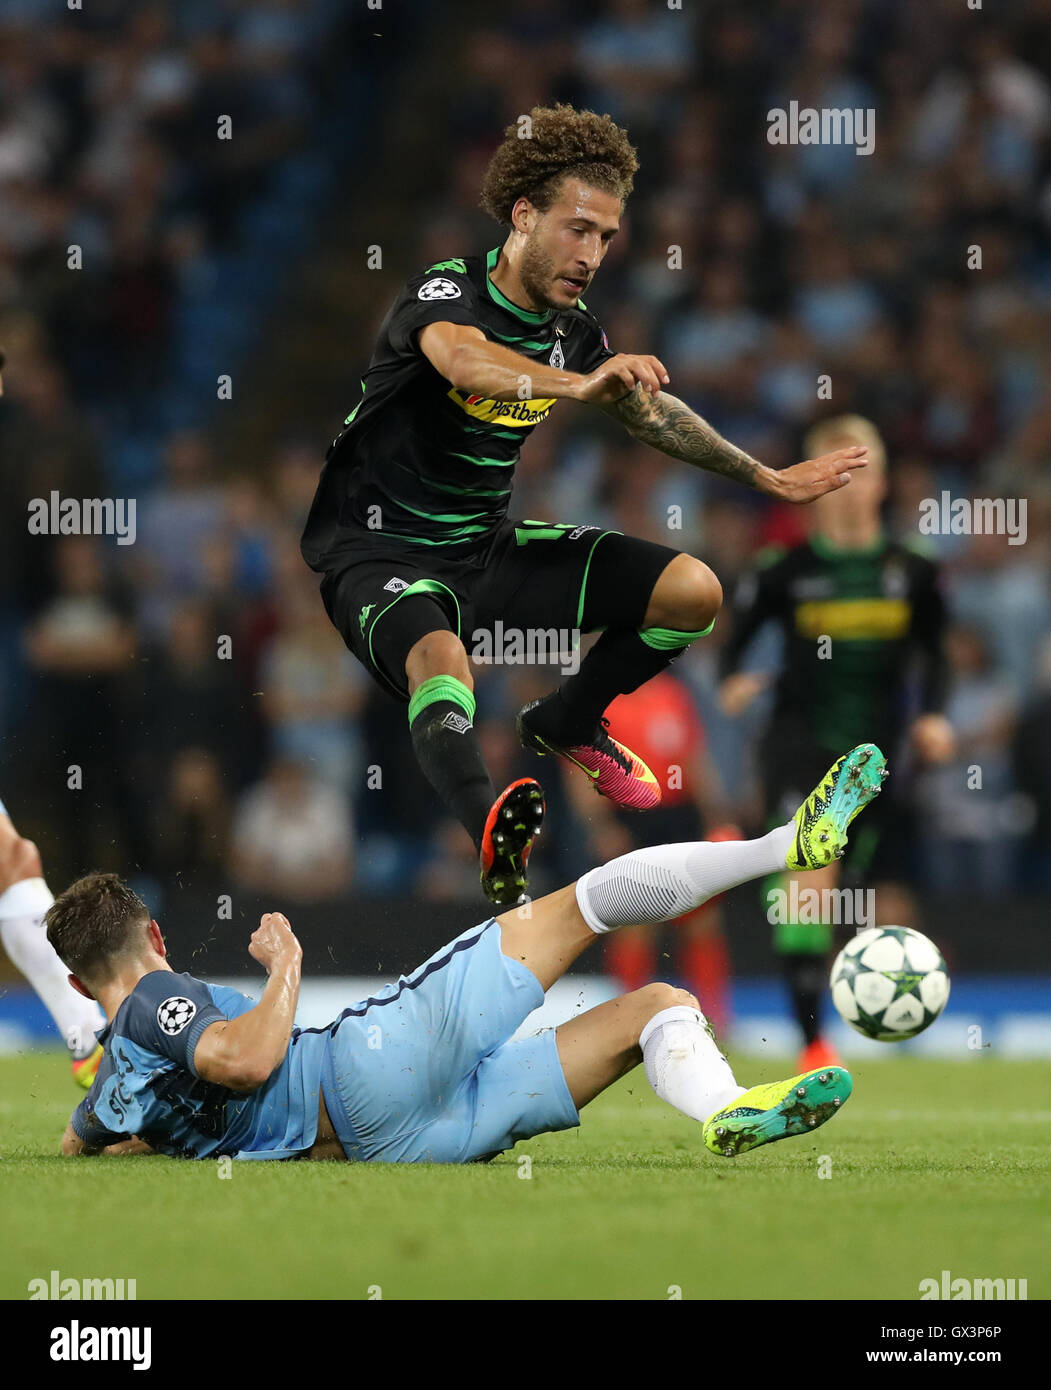 Manchester City's John Stones and Borussia Monchengladbach'a Fabian Johnson battle for the ball during the Champions League match at the Etihad Stadium, Manchester. Stock Photo